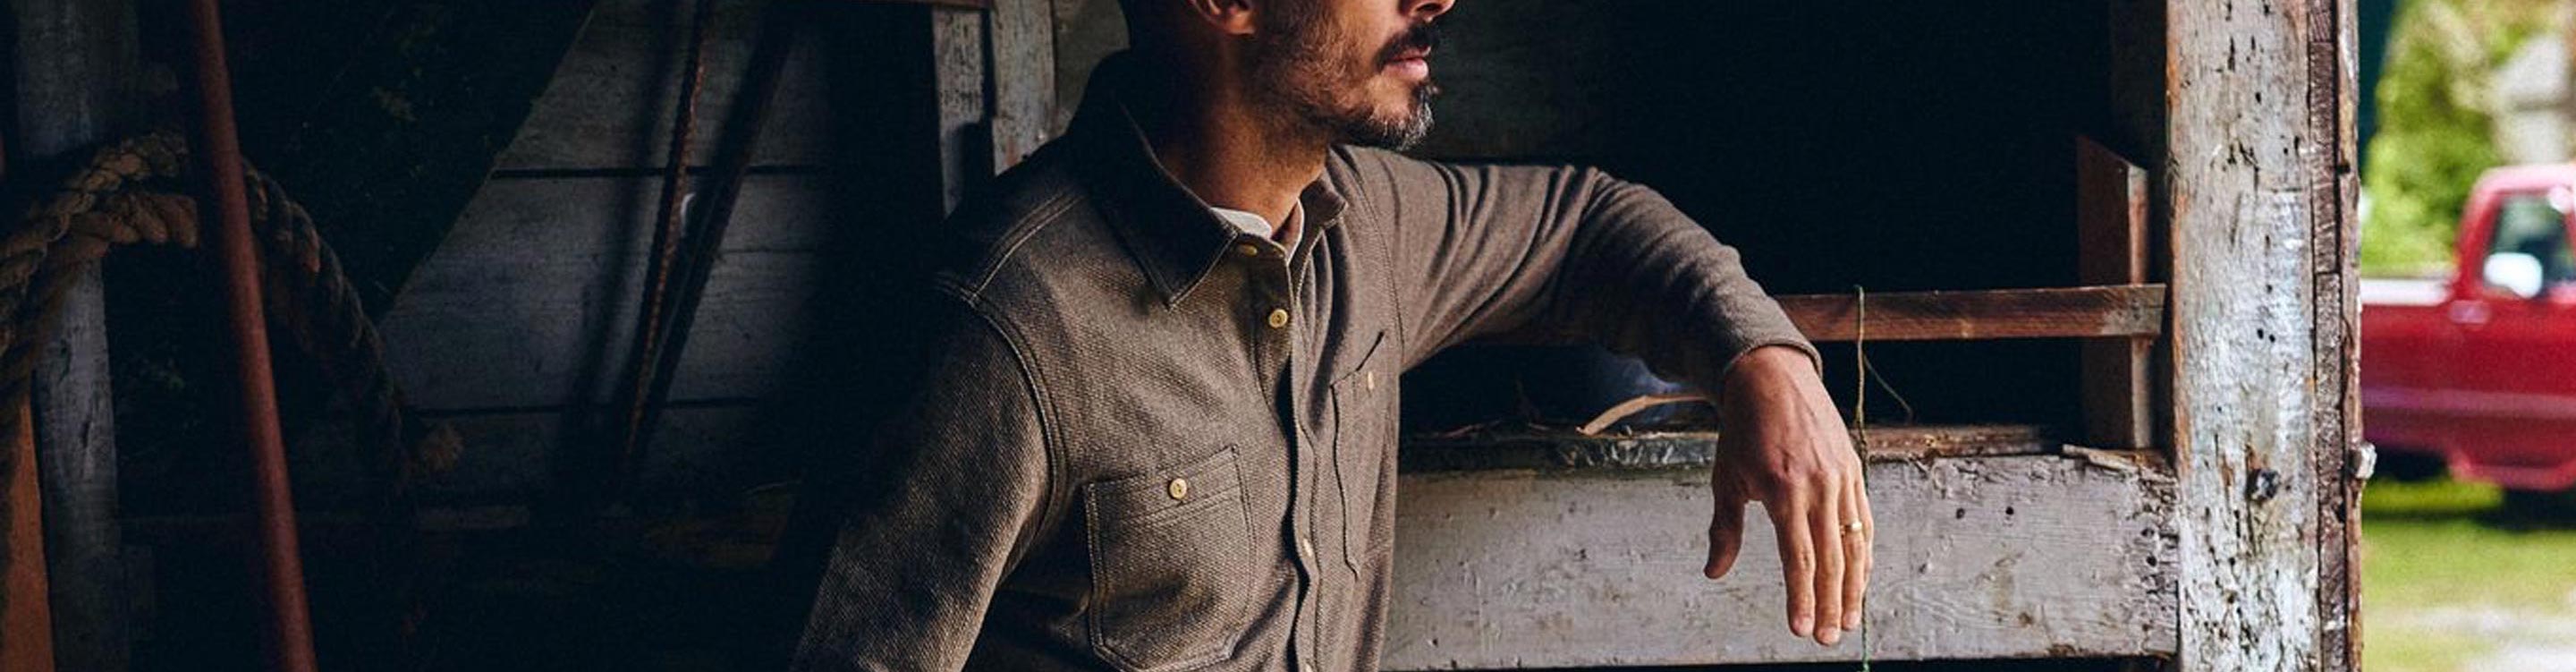 The Utility Shirt Men Stitch Knit - for Twill | in Knit Shirts Taylor